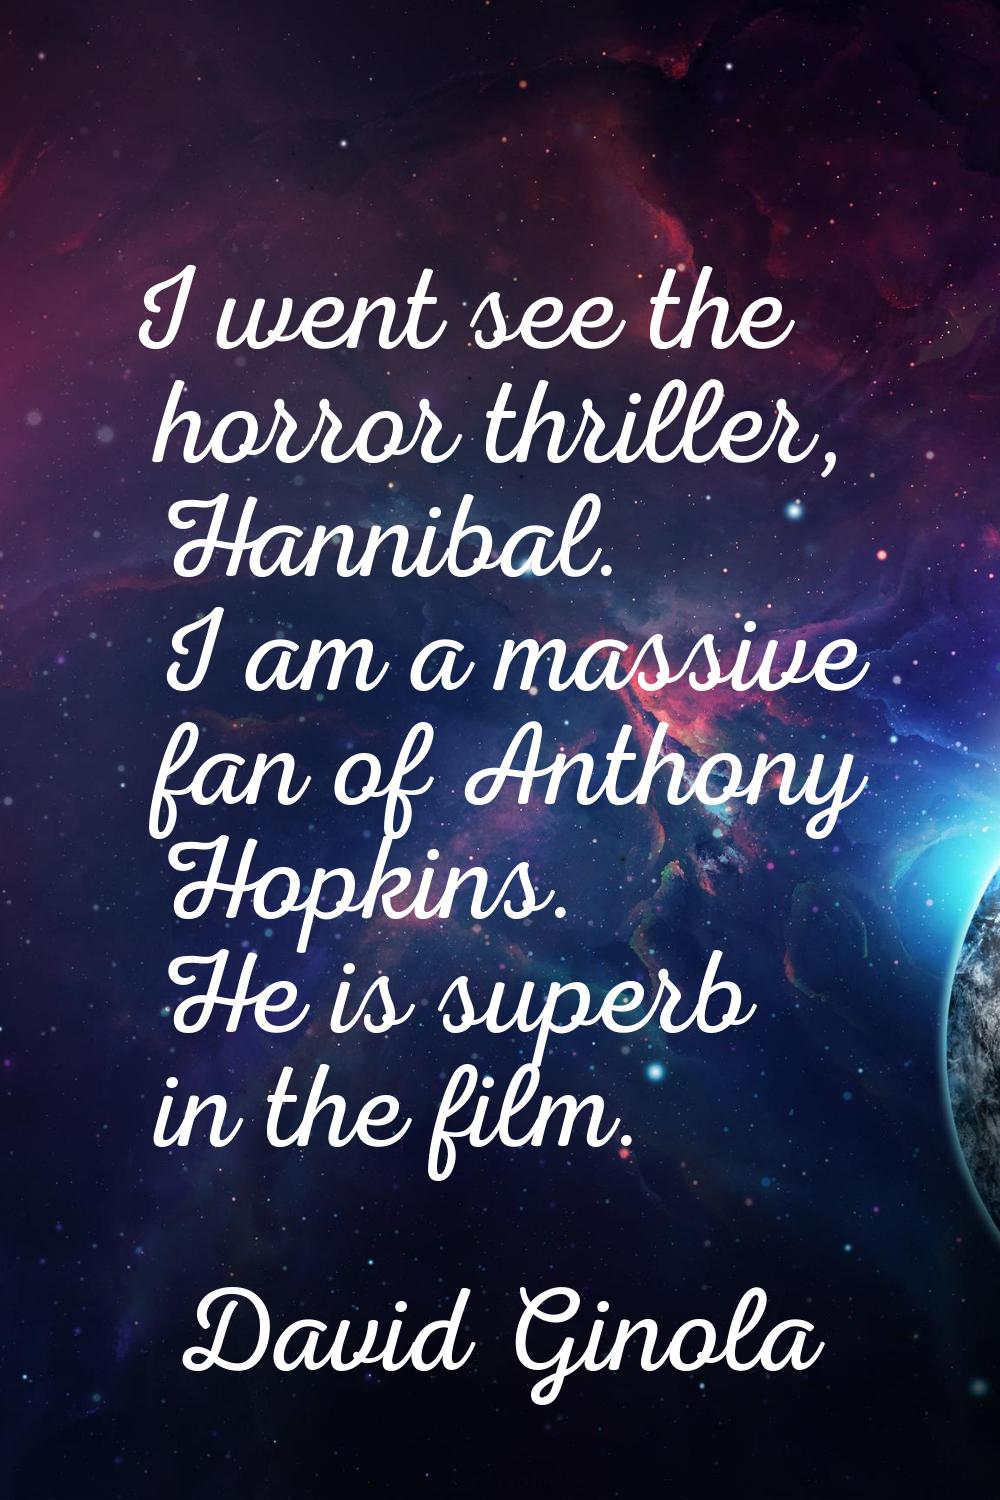 I went see the horror thriller, Hannibal. I am a massive fan of Anthony Hopkins. He is superb in th